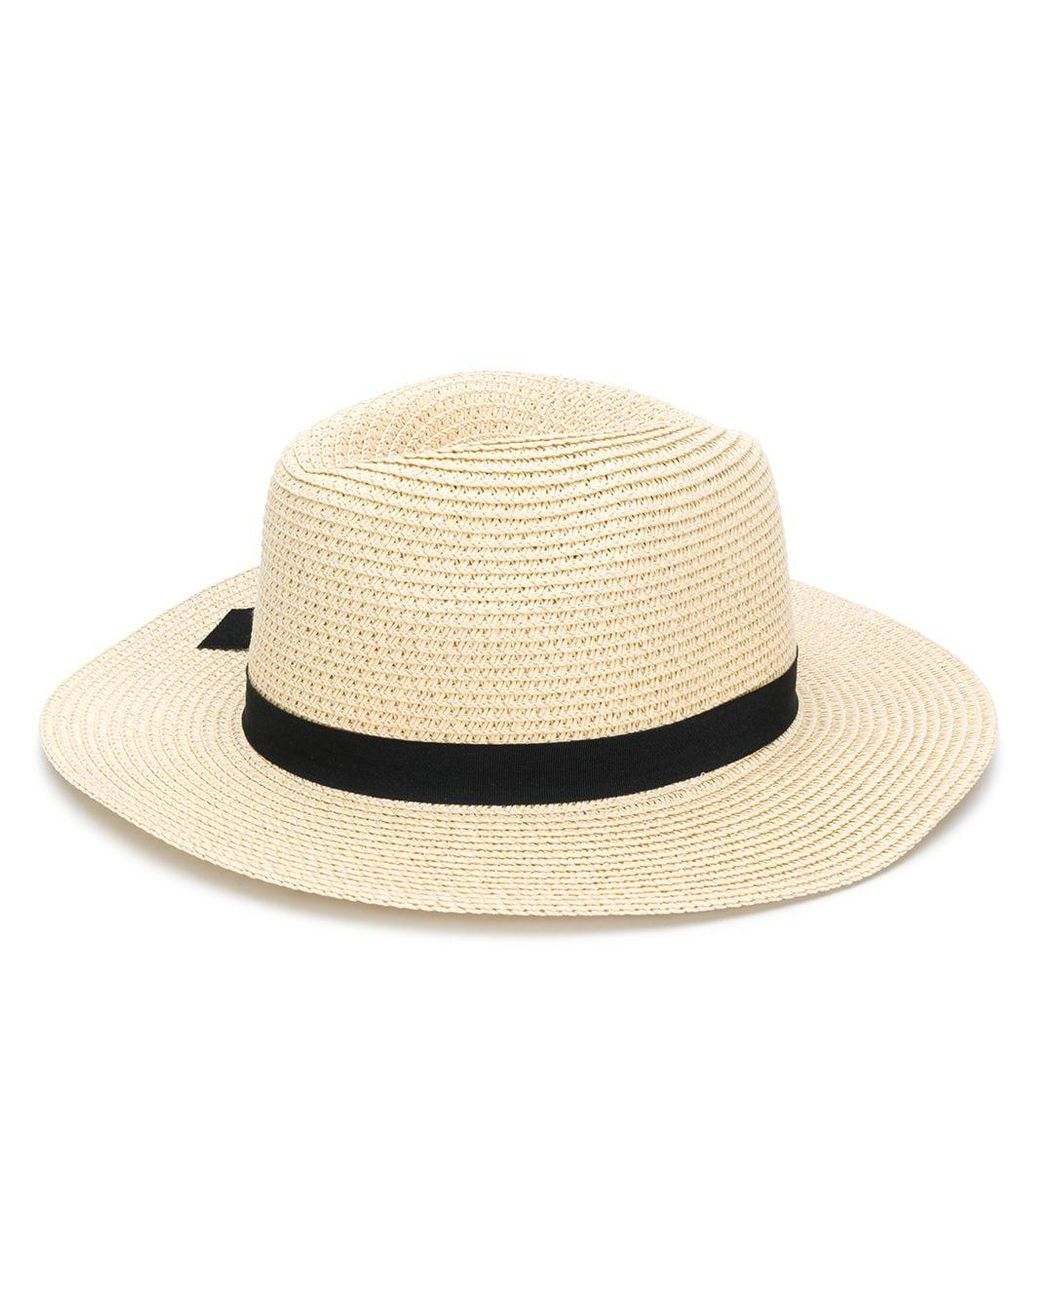 Polo Ralph Lauren Bow-band Straw Hat in Natural | Lyst